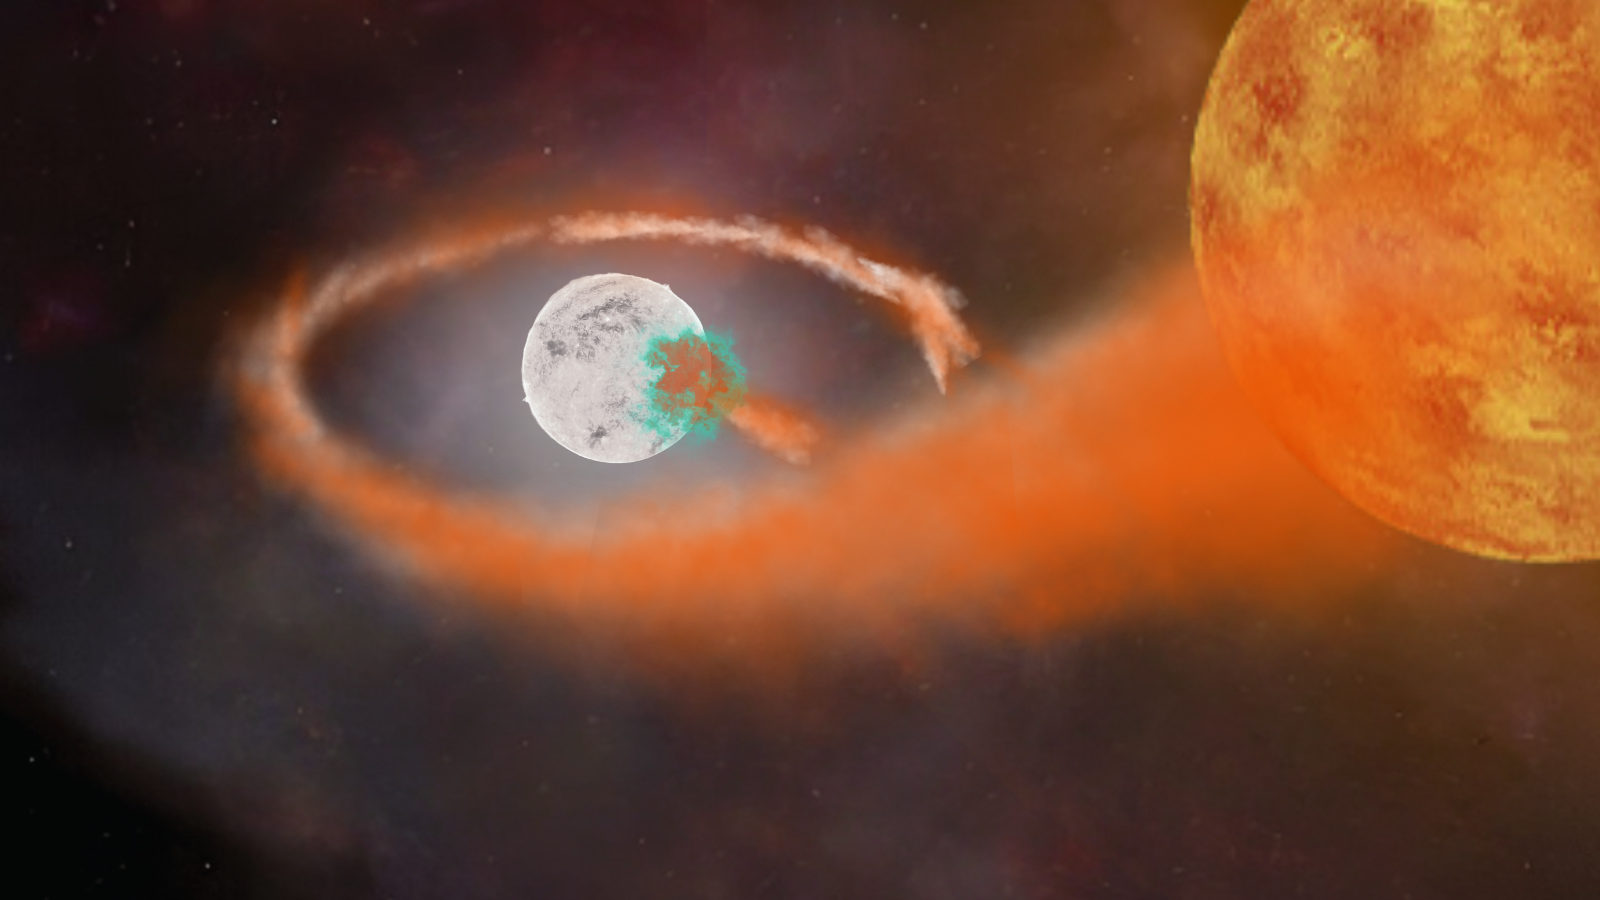 A white orb illustration surrounded by a trail of orange gas leading to a glowing star toward the top right of the scene.